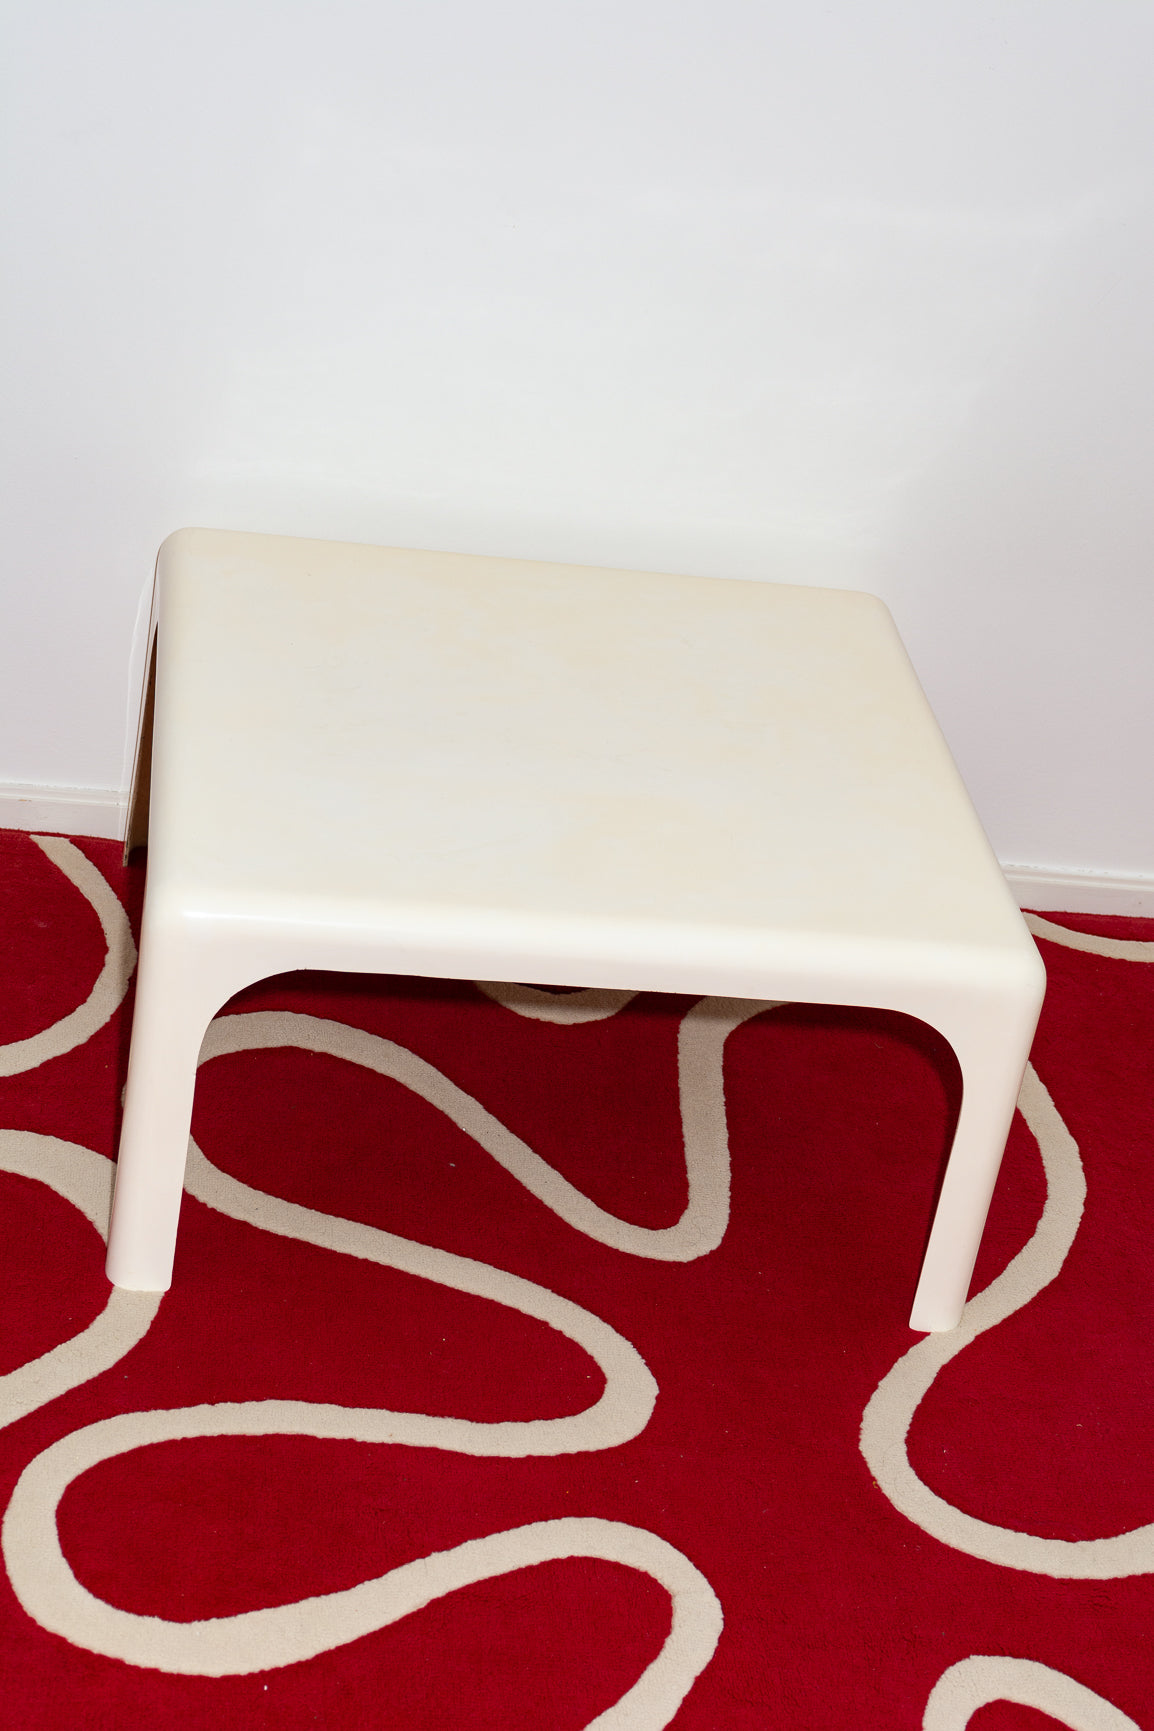 Molded off-white coffee table